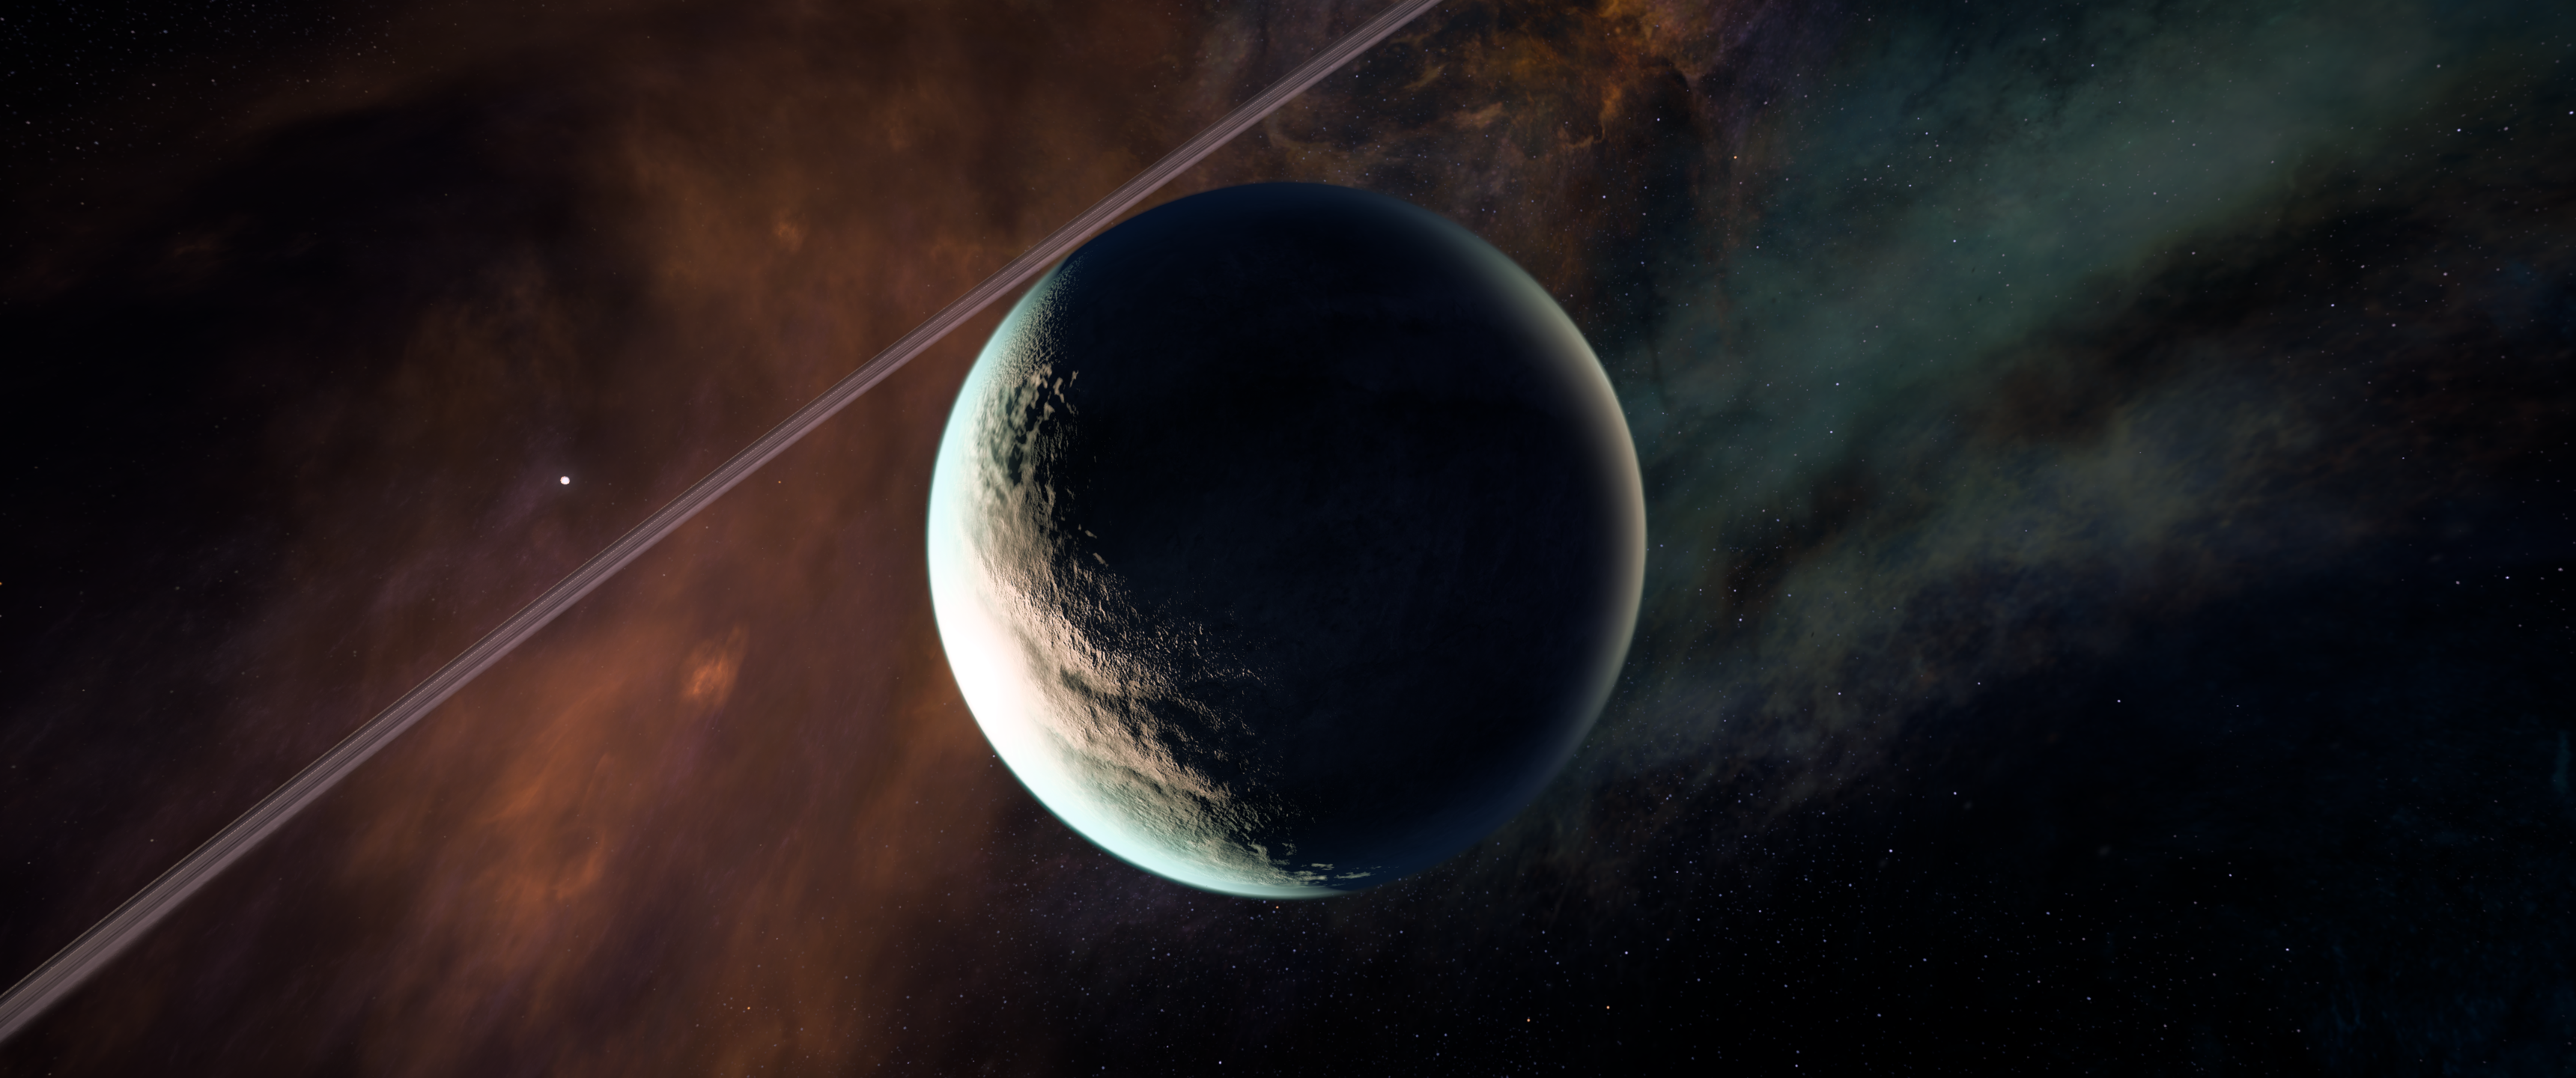 Space Andromeda Mass Effect Planet 3440x1440